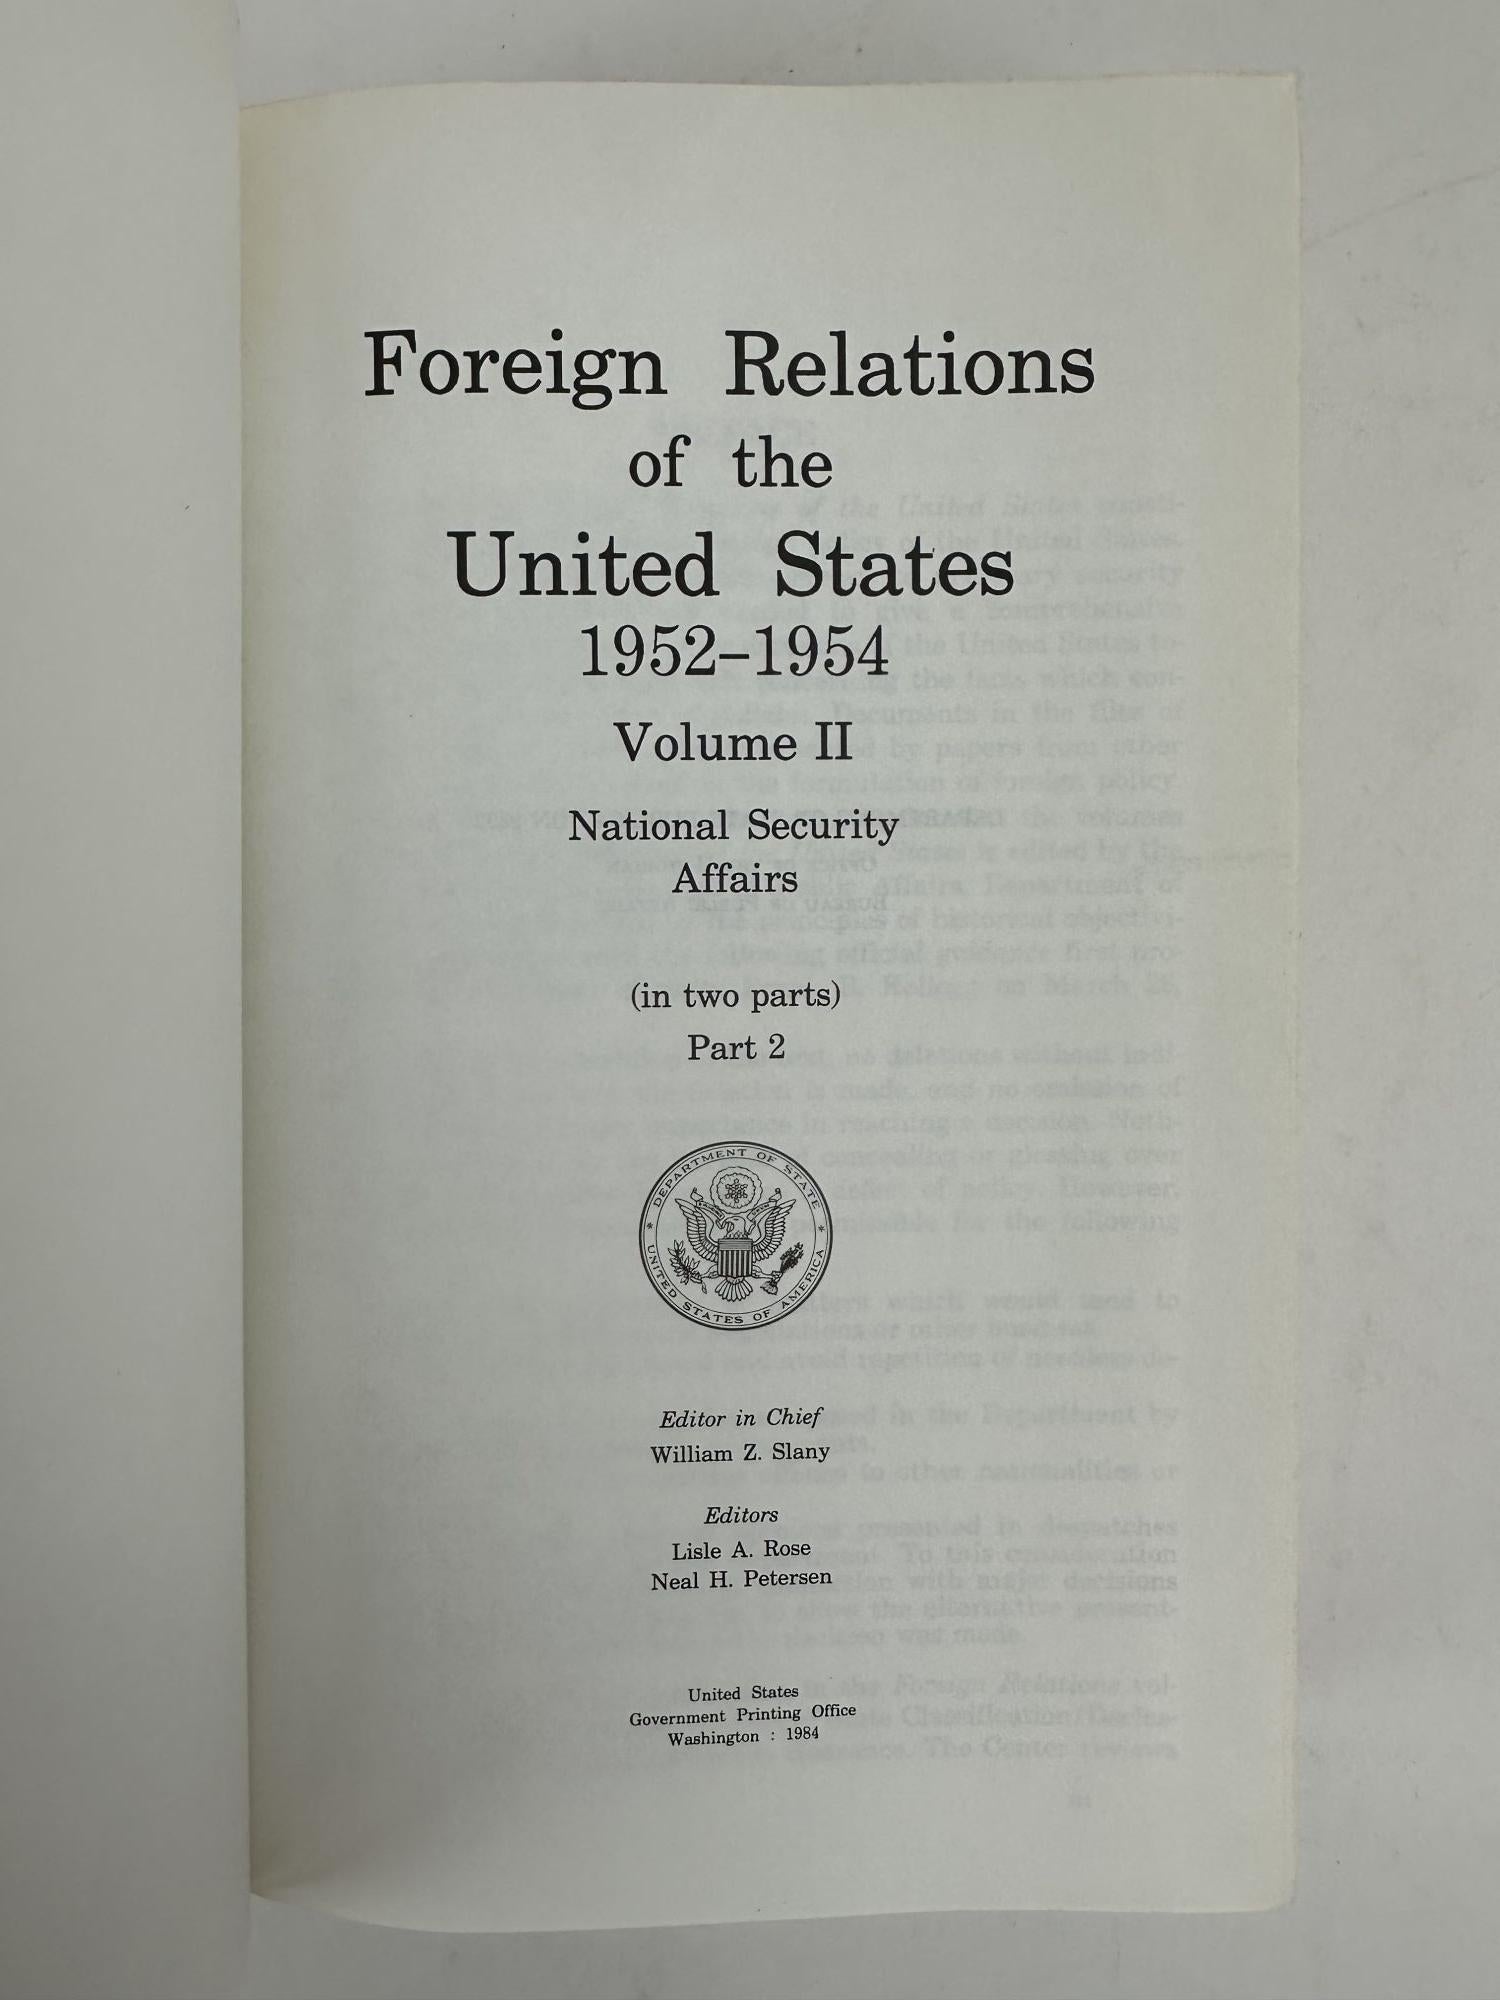 FOREIGN RELATIONS OF THE UNITED STATES 1952-1954 VOLUME II: NATIONAL  SECURITY IN TWO PARTS TWO VOLUMES, COMPLETE by William Z. Slany